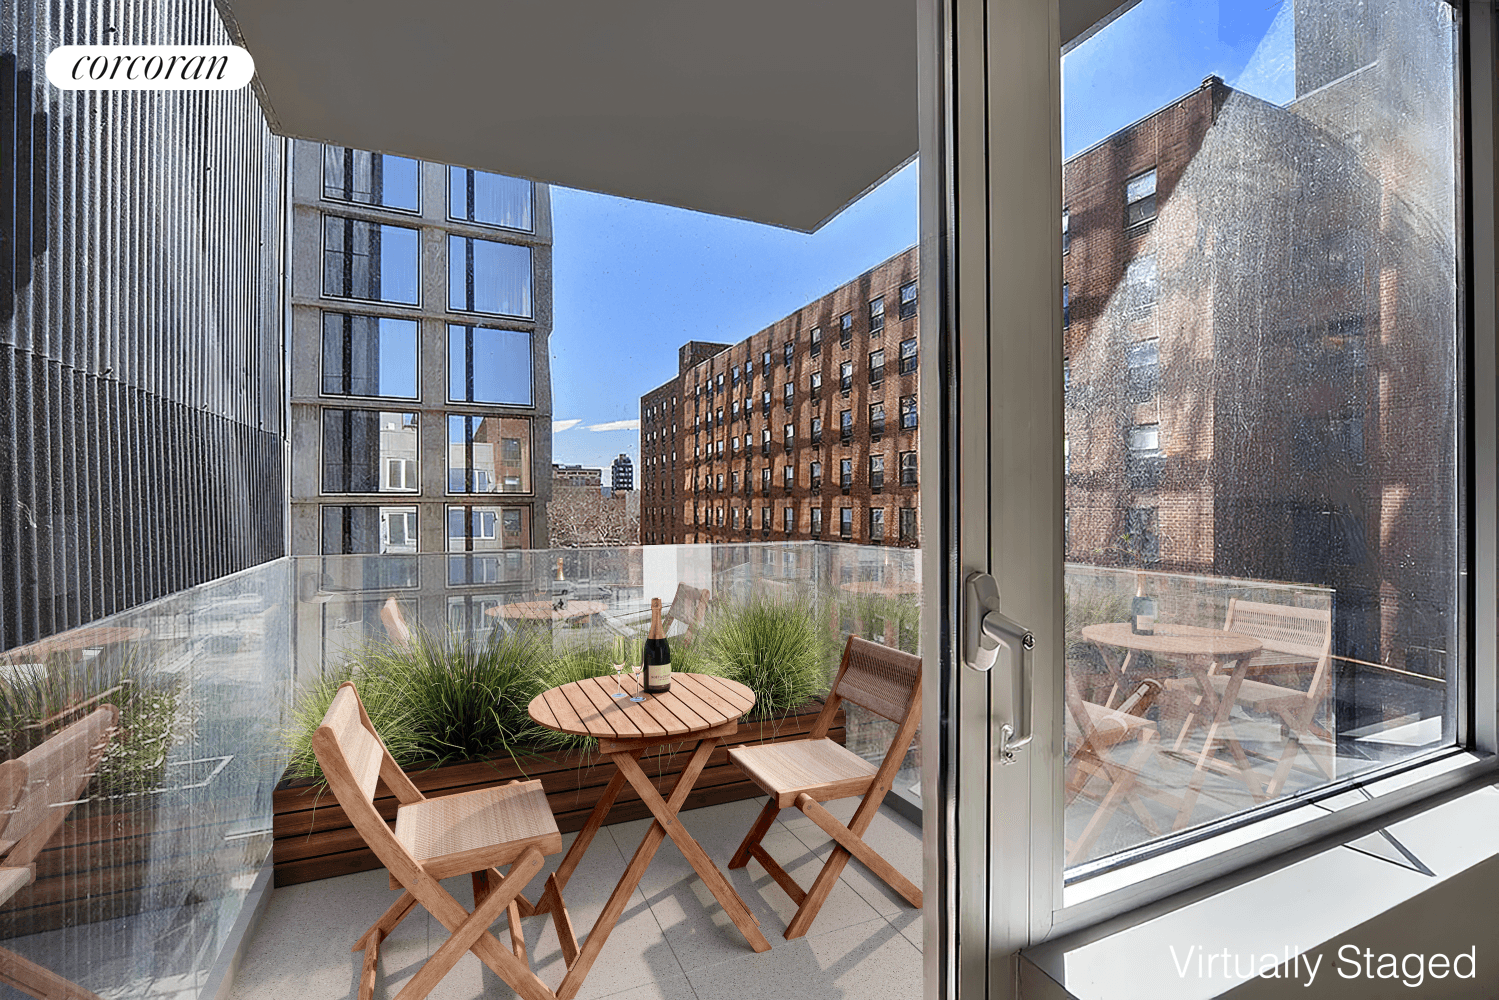 Experience the epitome of modern luxury at 255 Bowery, centrally located at the crossroads of Noho, Nolita and the Lower East Side.